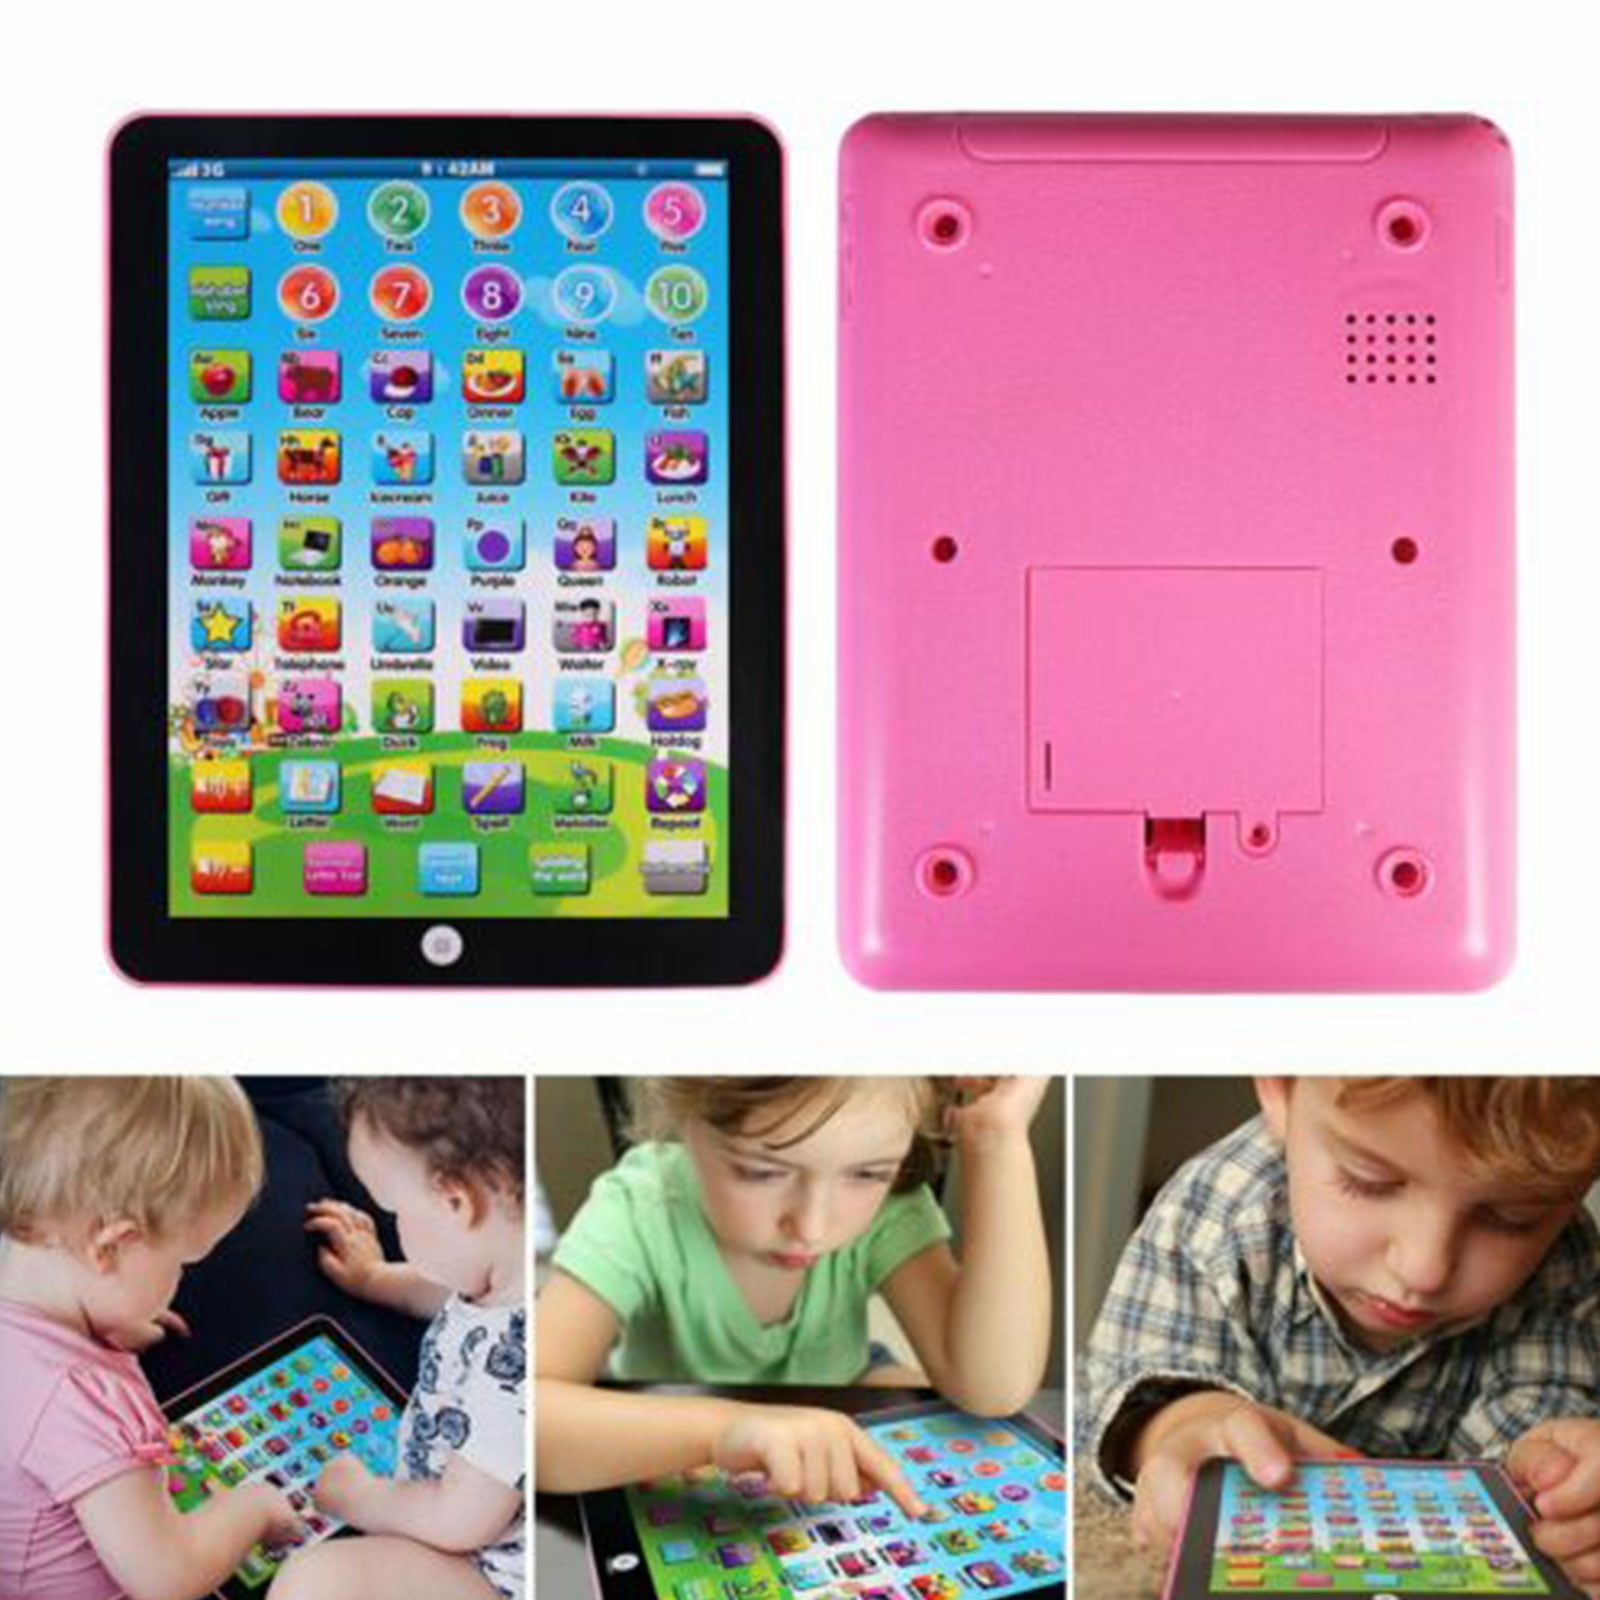 Preschool Children Toys Toddler Gifts for Age 1 2 3 4 5 Year Old Boys and Girls BEAURE Learning Tablet with ABC/Words/Numbers/Color/Games/Music， Interactive Educational Electronic Learning Pad Toys 